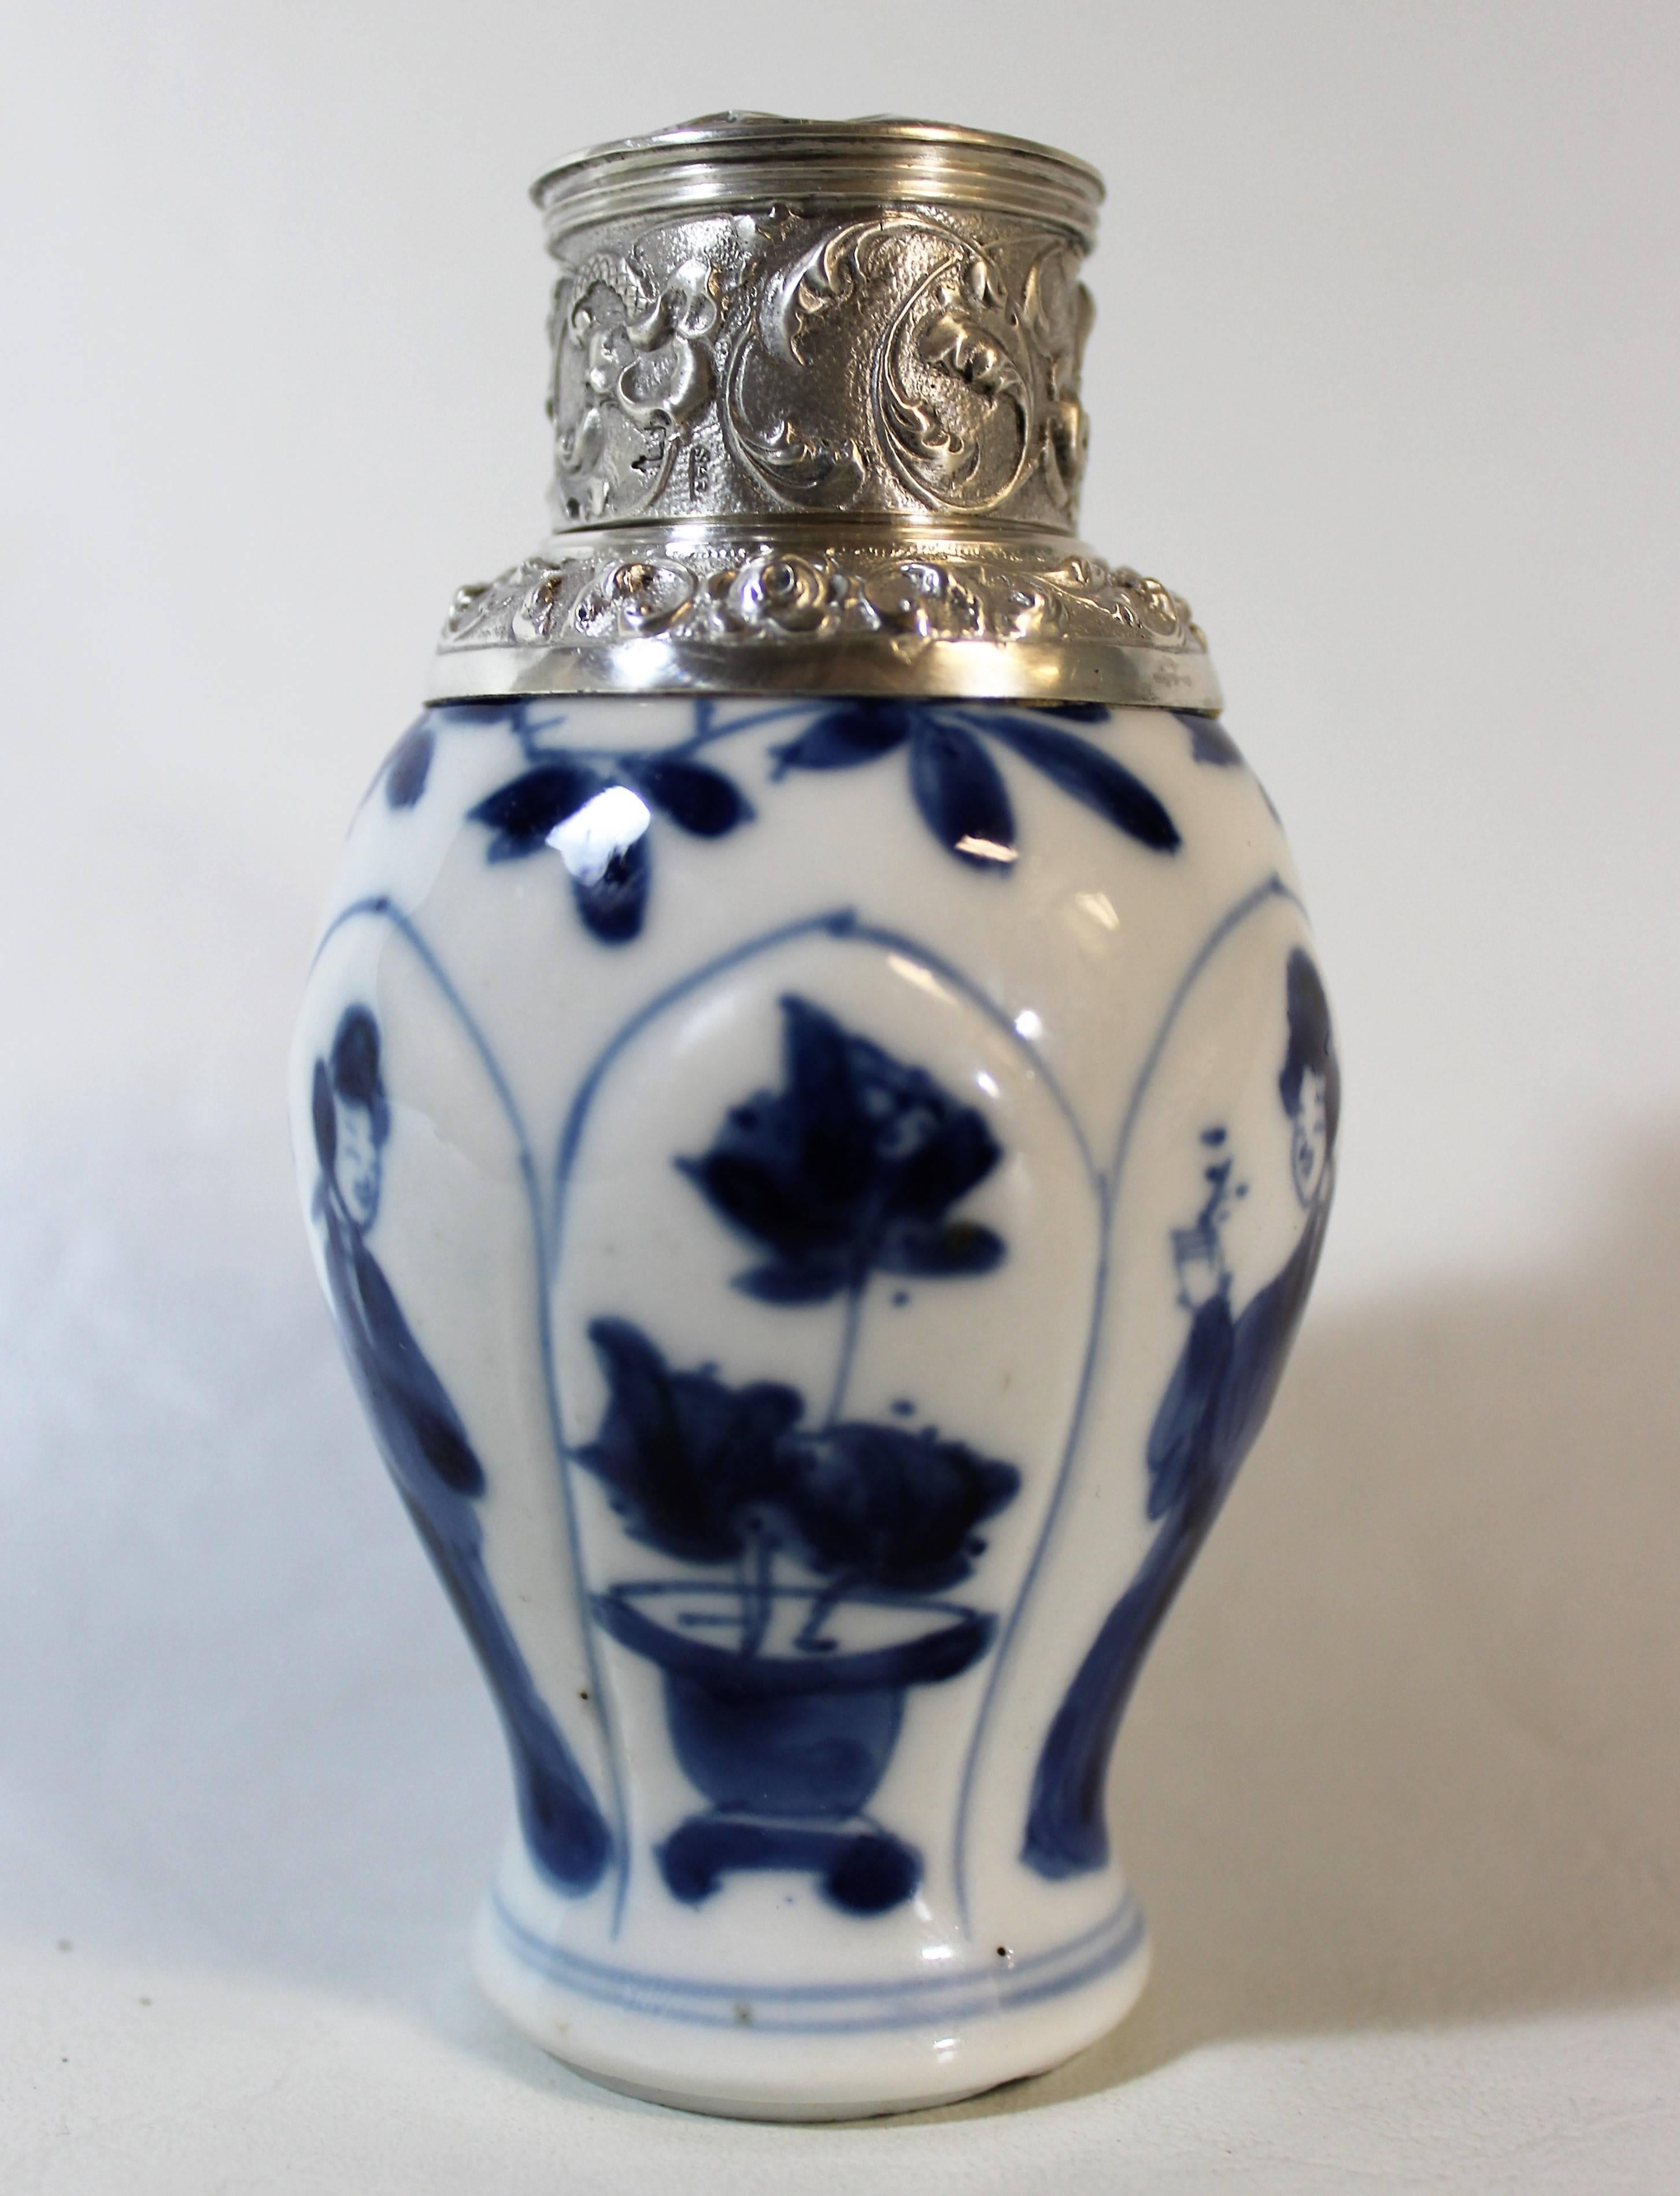 19th century Chinese porcelain tea caddy with Dutch hallmarked sterling silver lid featuring scrolling foliate and floral designs and a windmill done in relief.